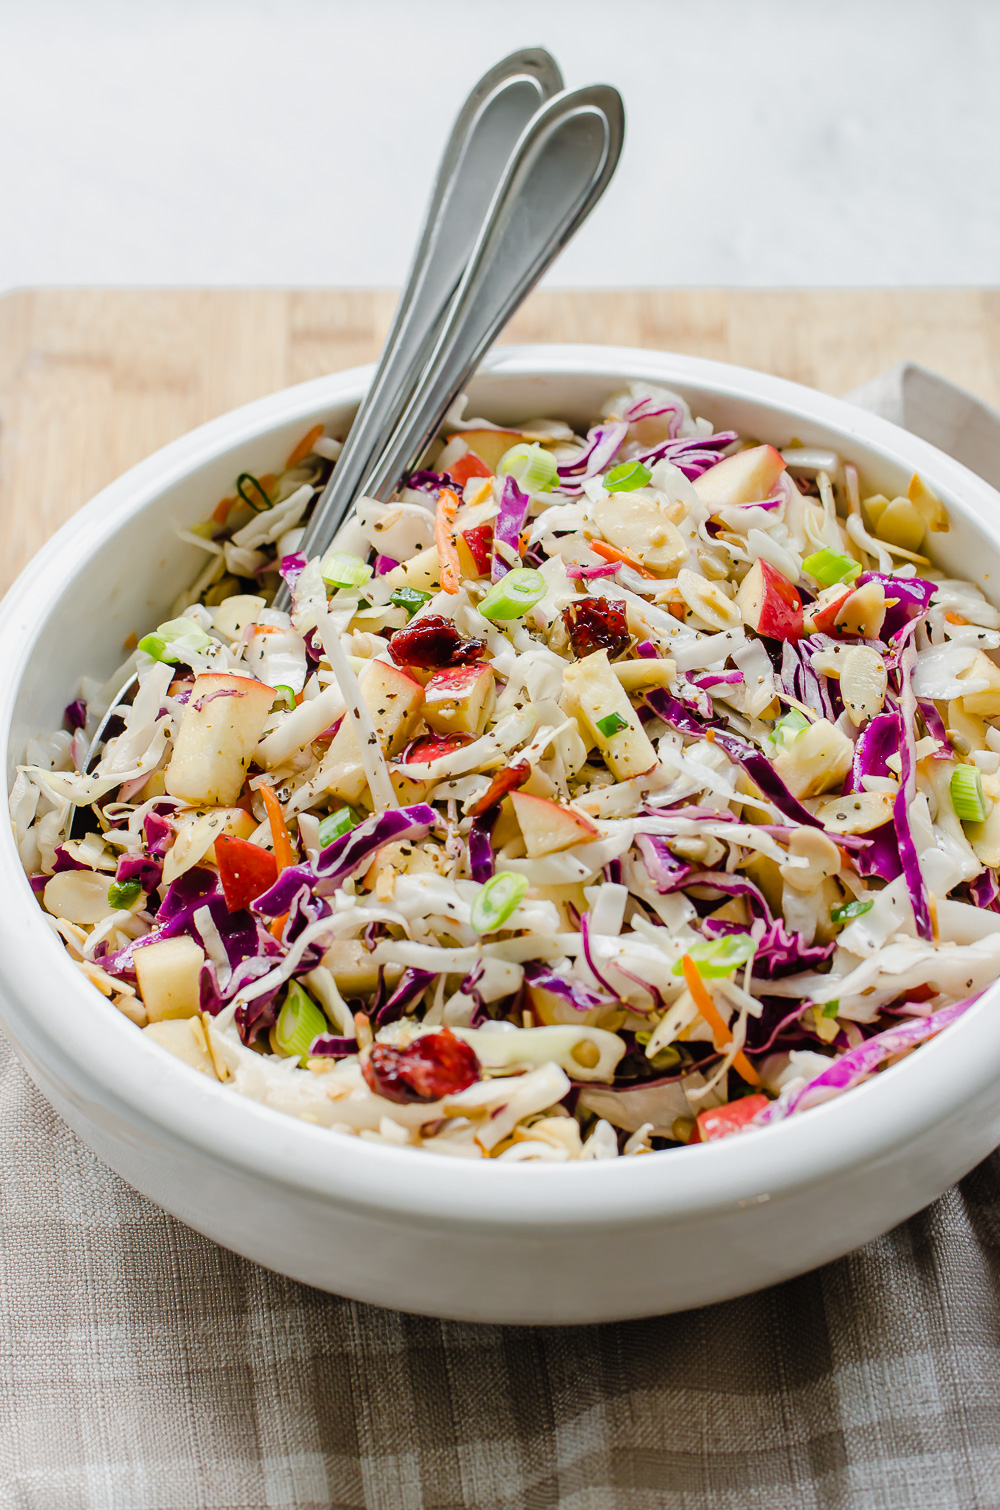 Asian slaw in a white bowl with serving spoons.